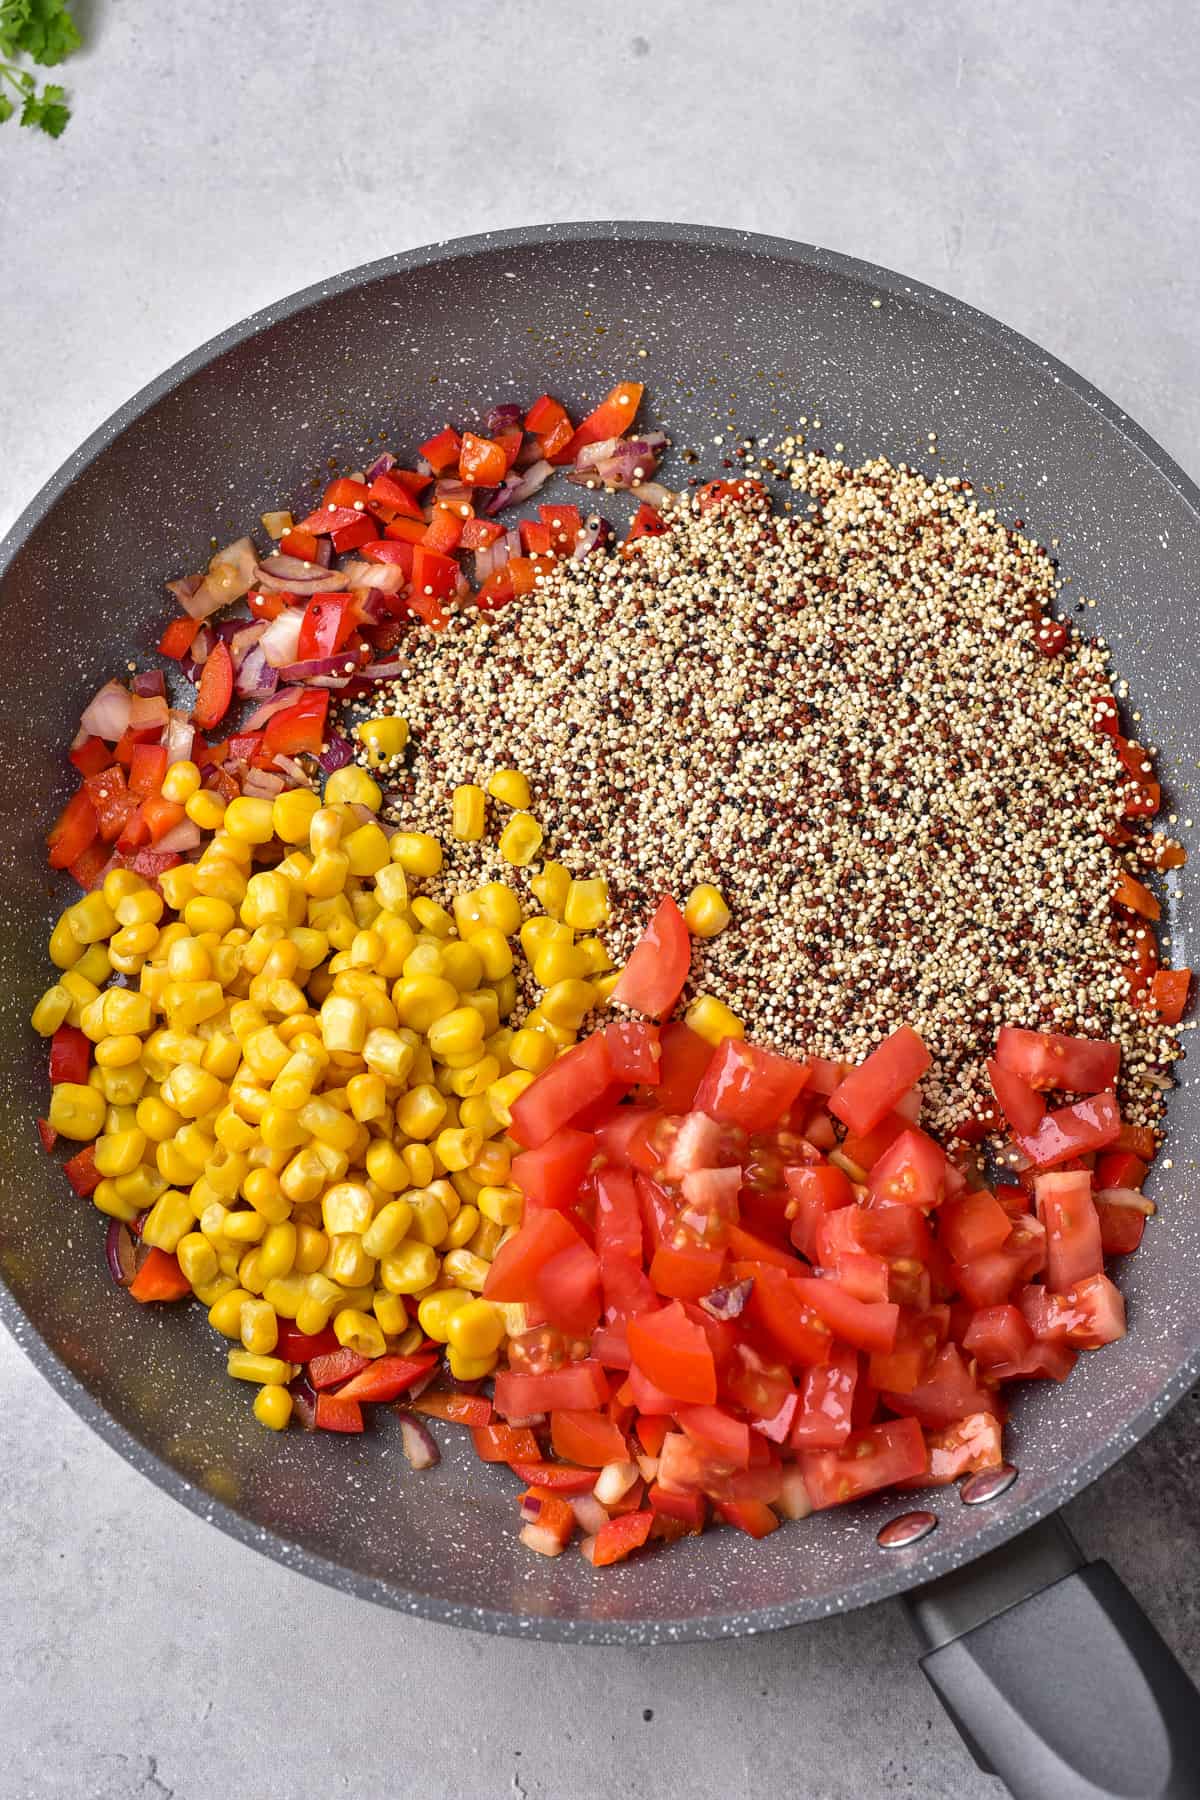 Red pepper, onions, tomatoes, corn, and quinoa in a frying pan.